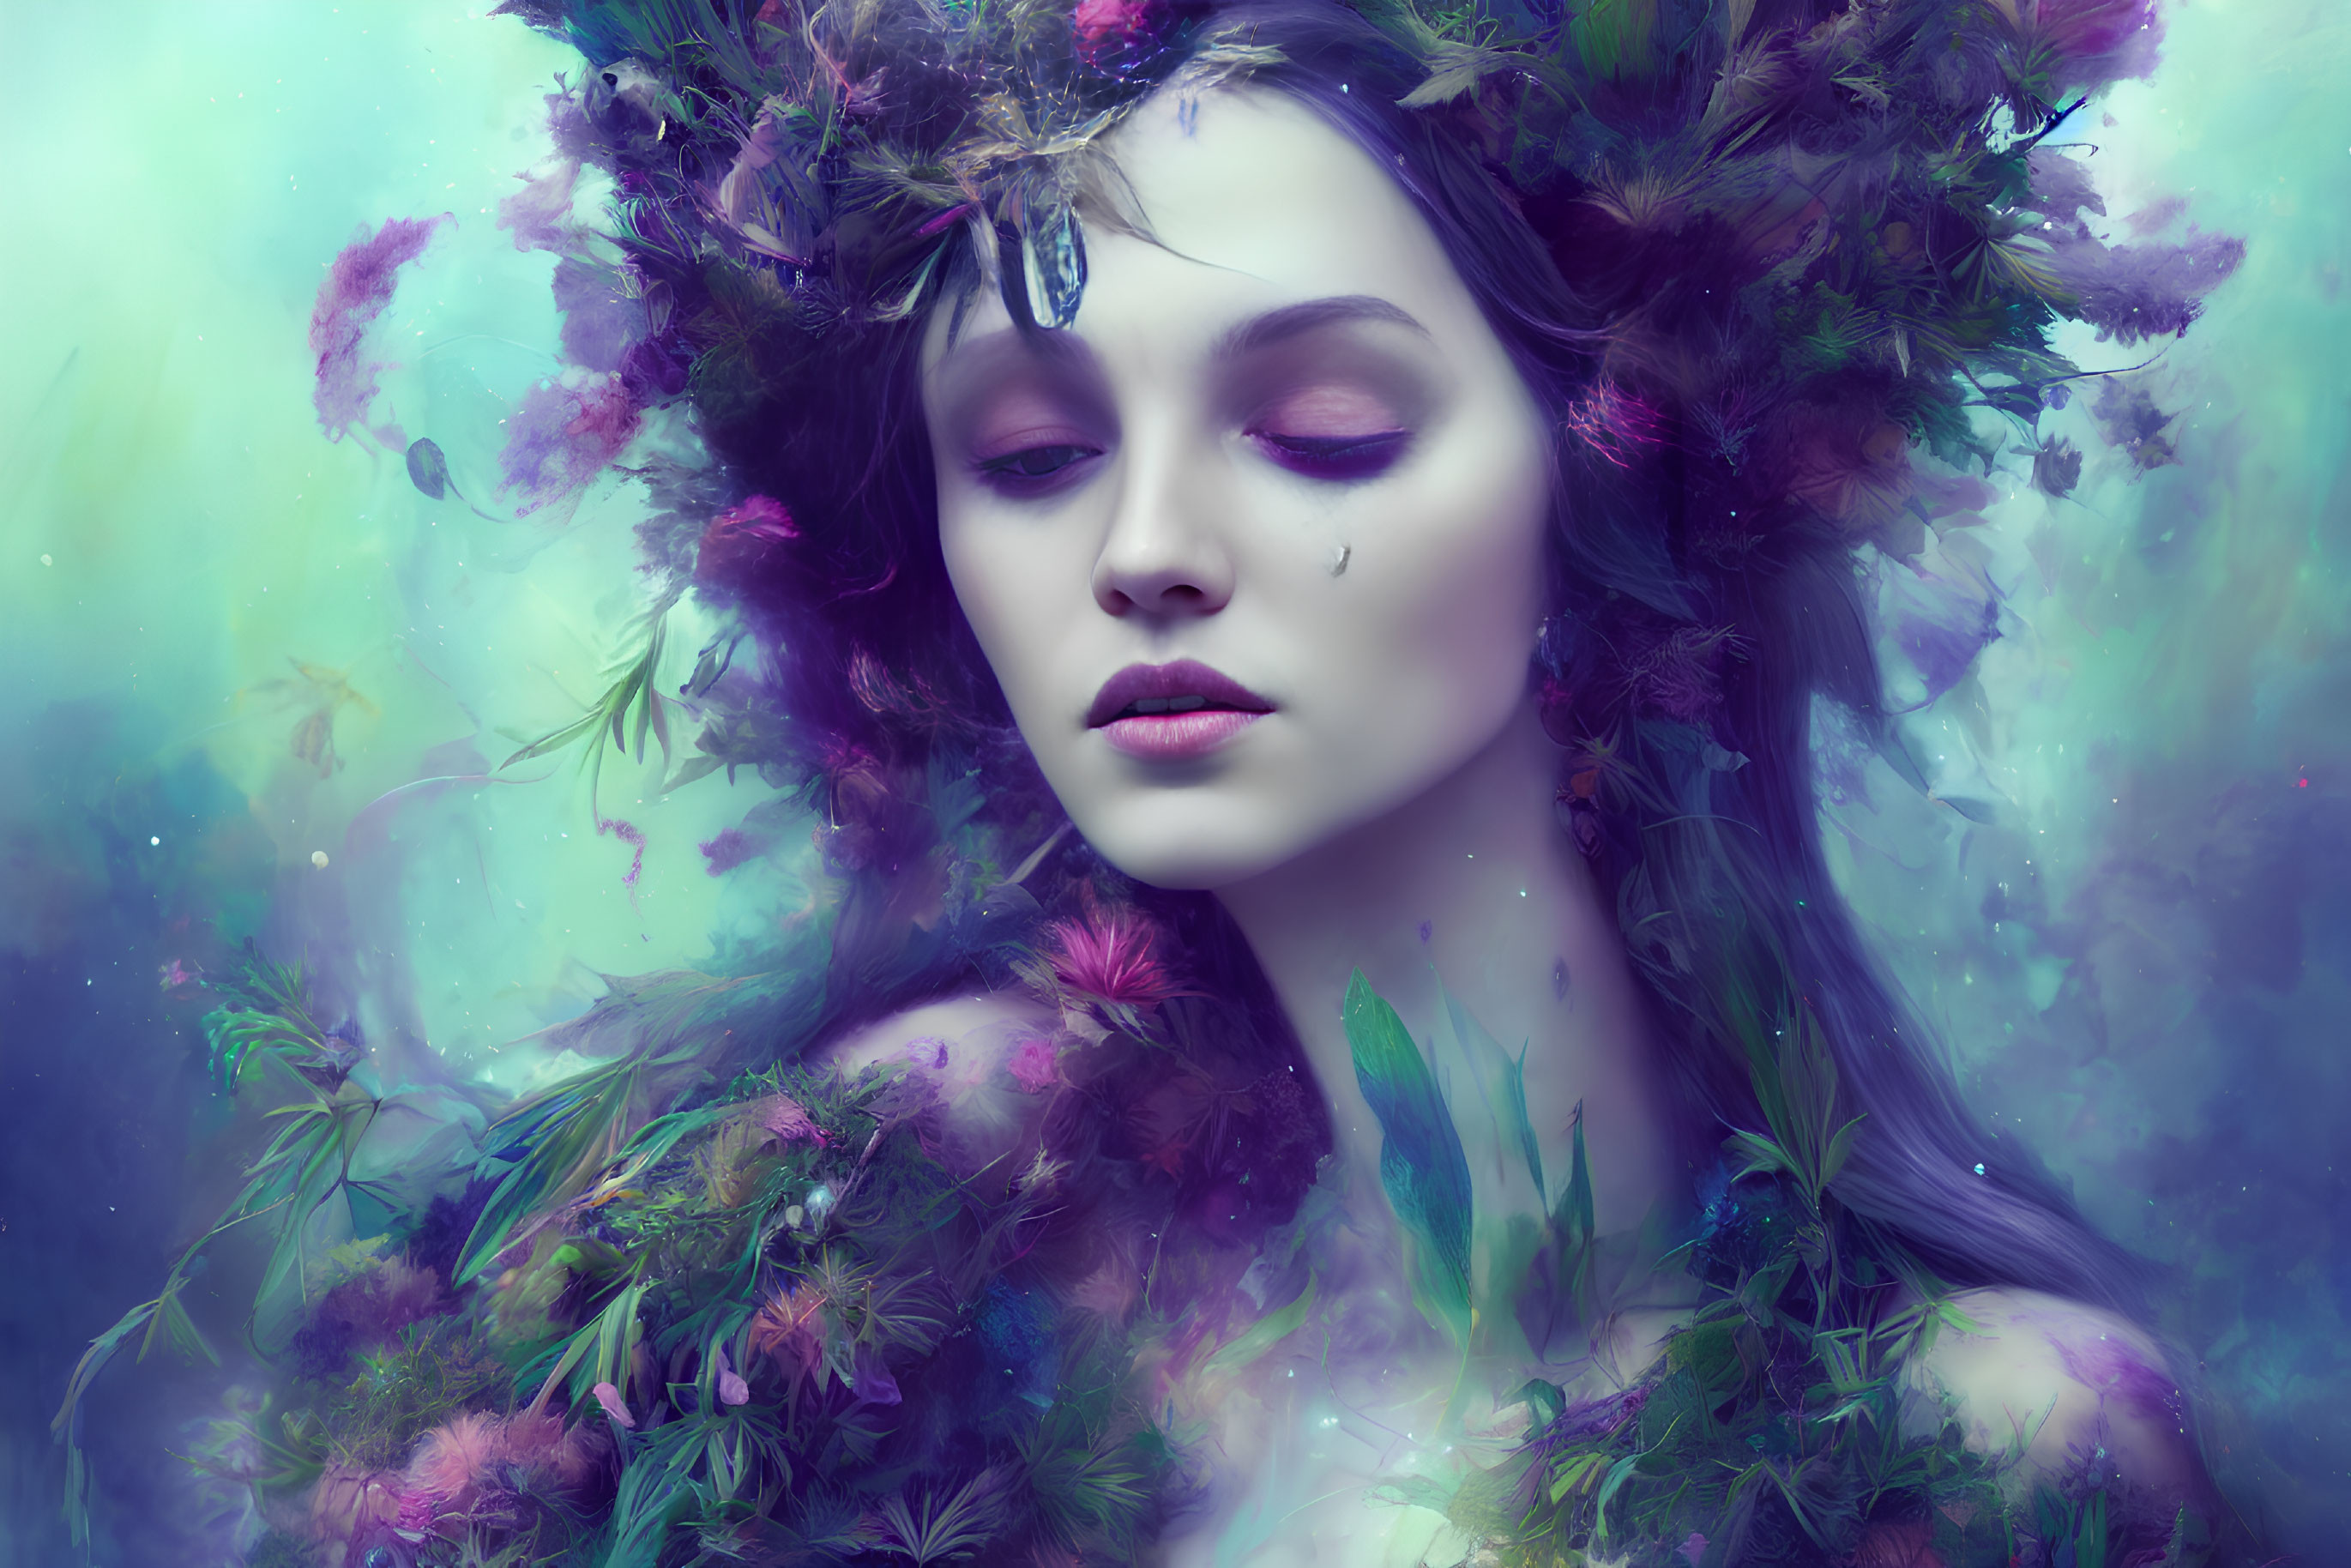 Surreal portrait of woman with floral headdress in ethereal setting